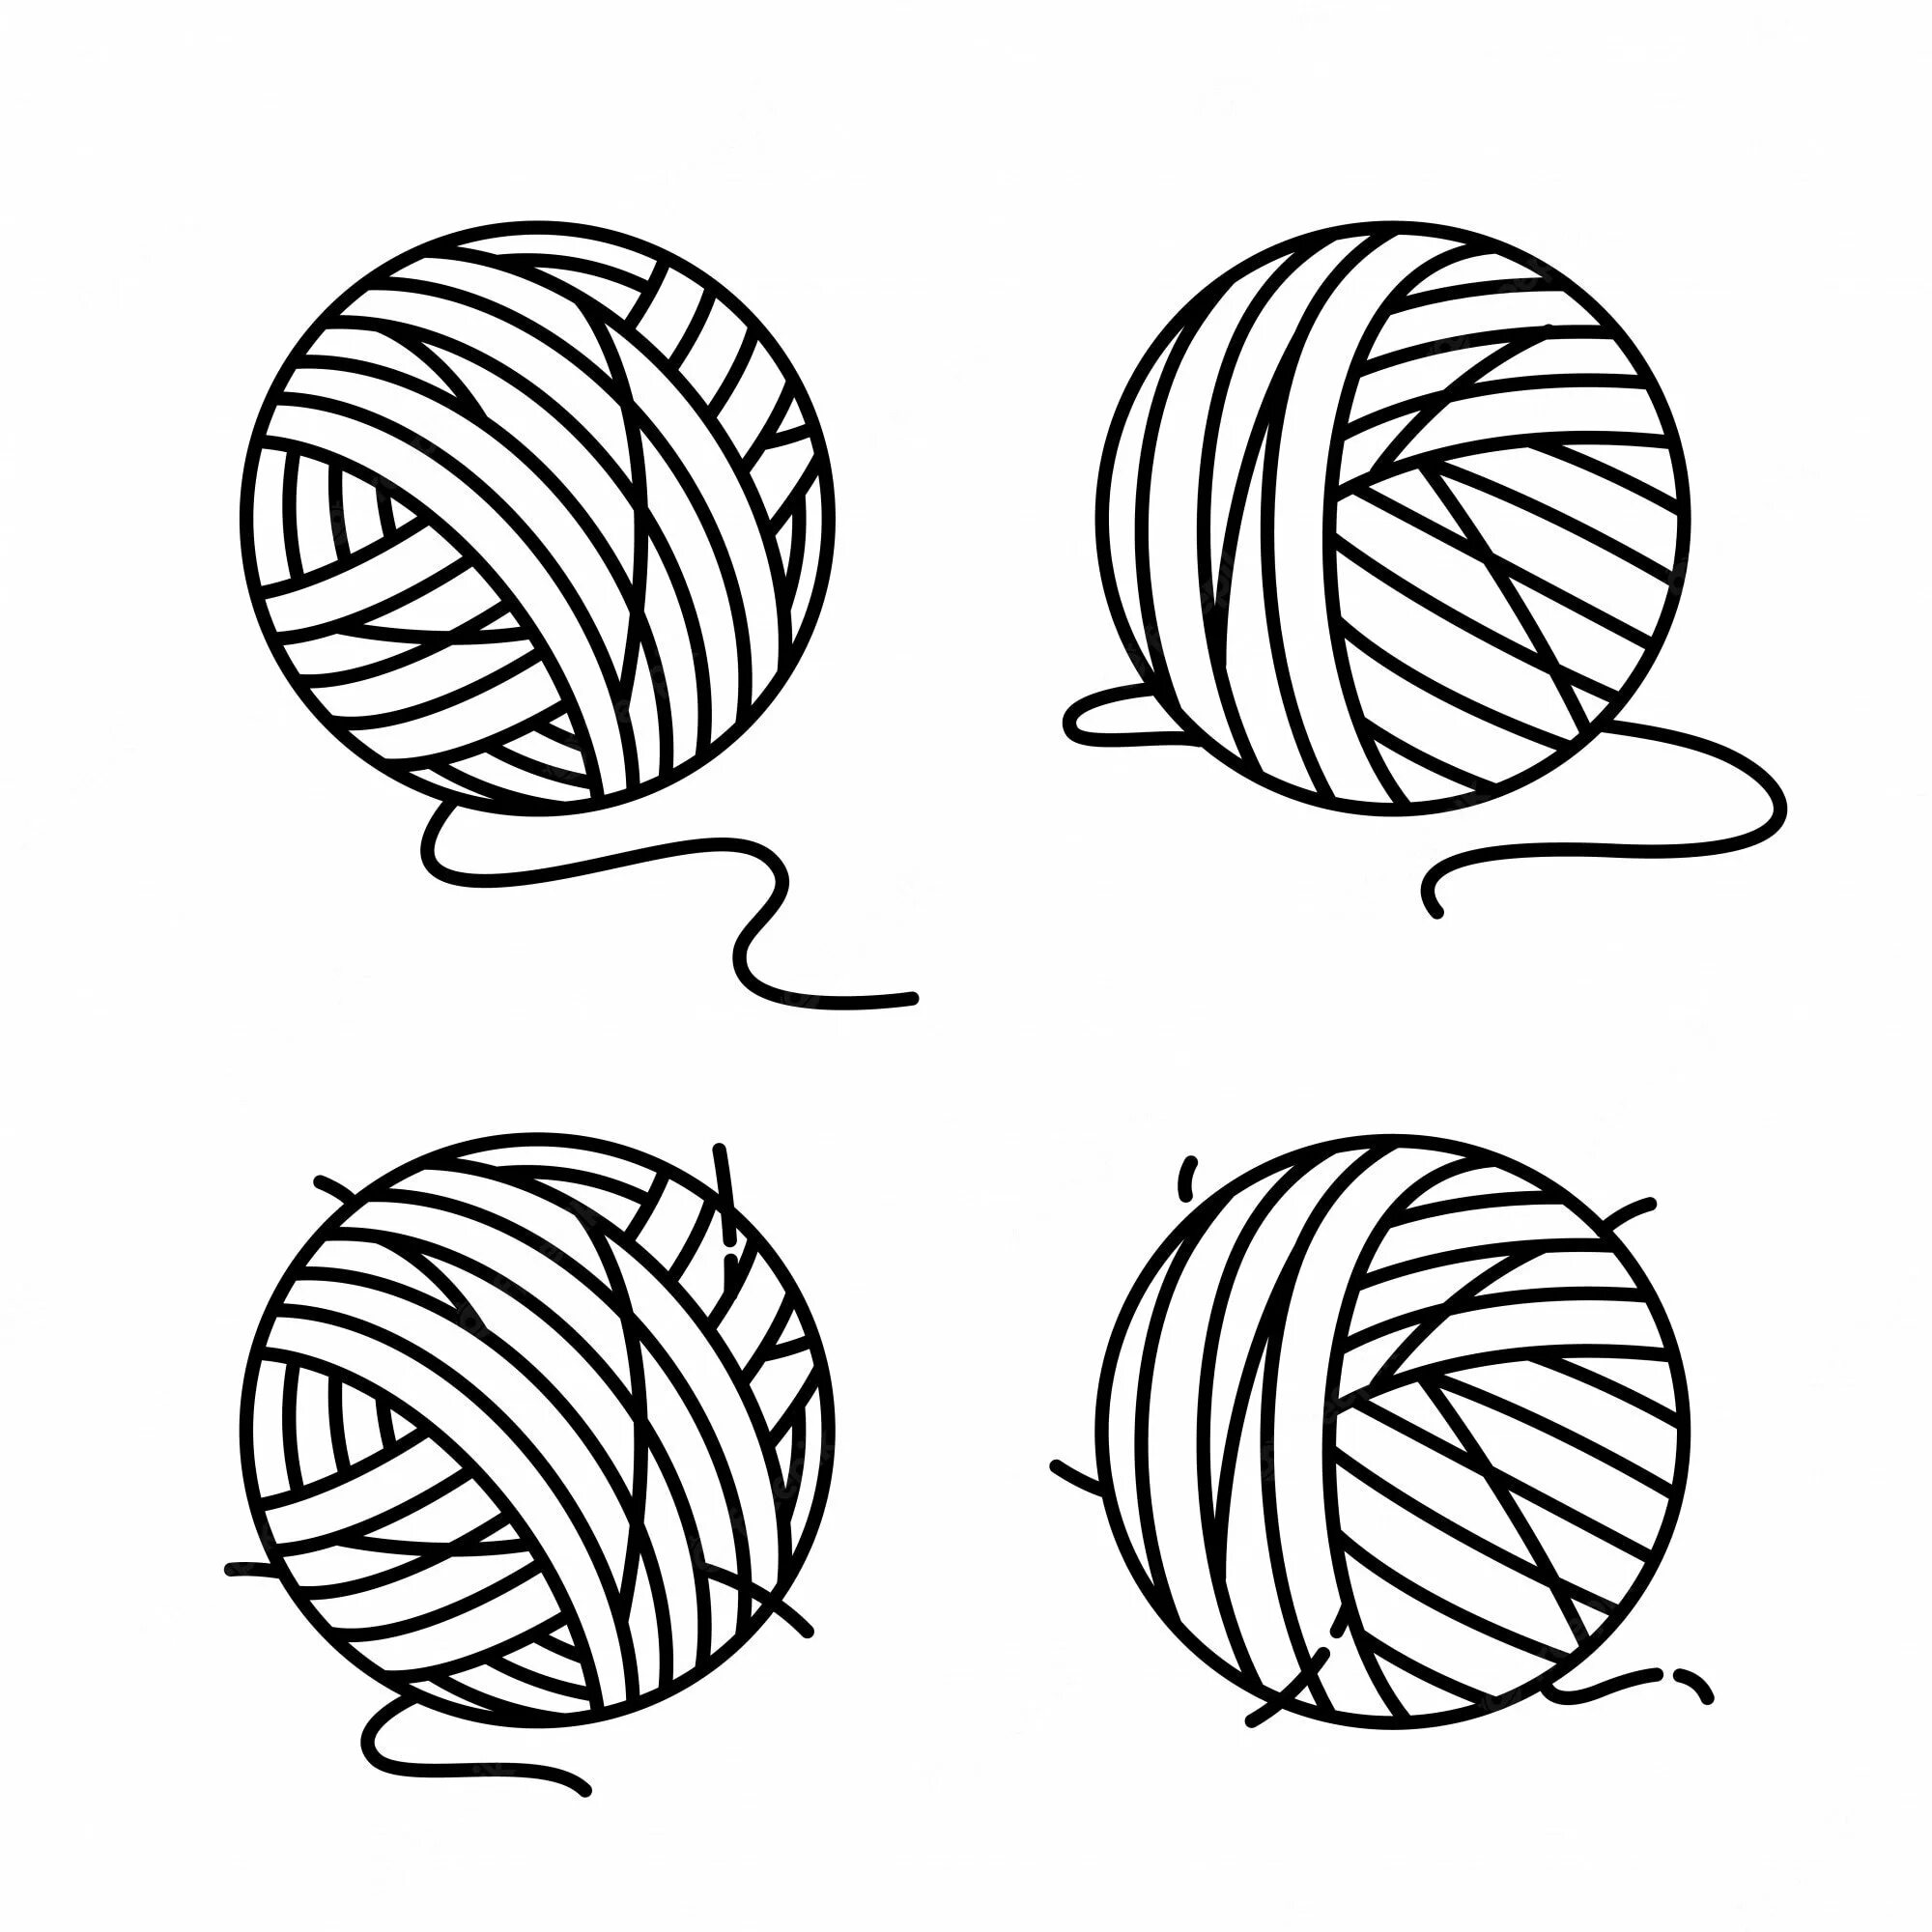 Unique ball coloring page for kids